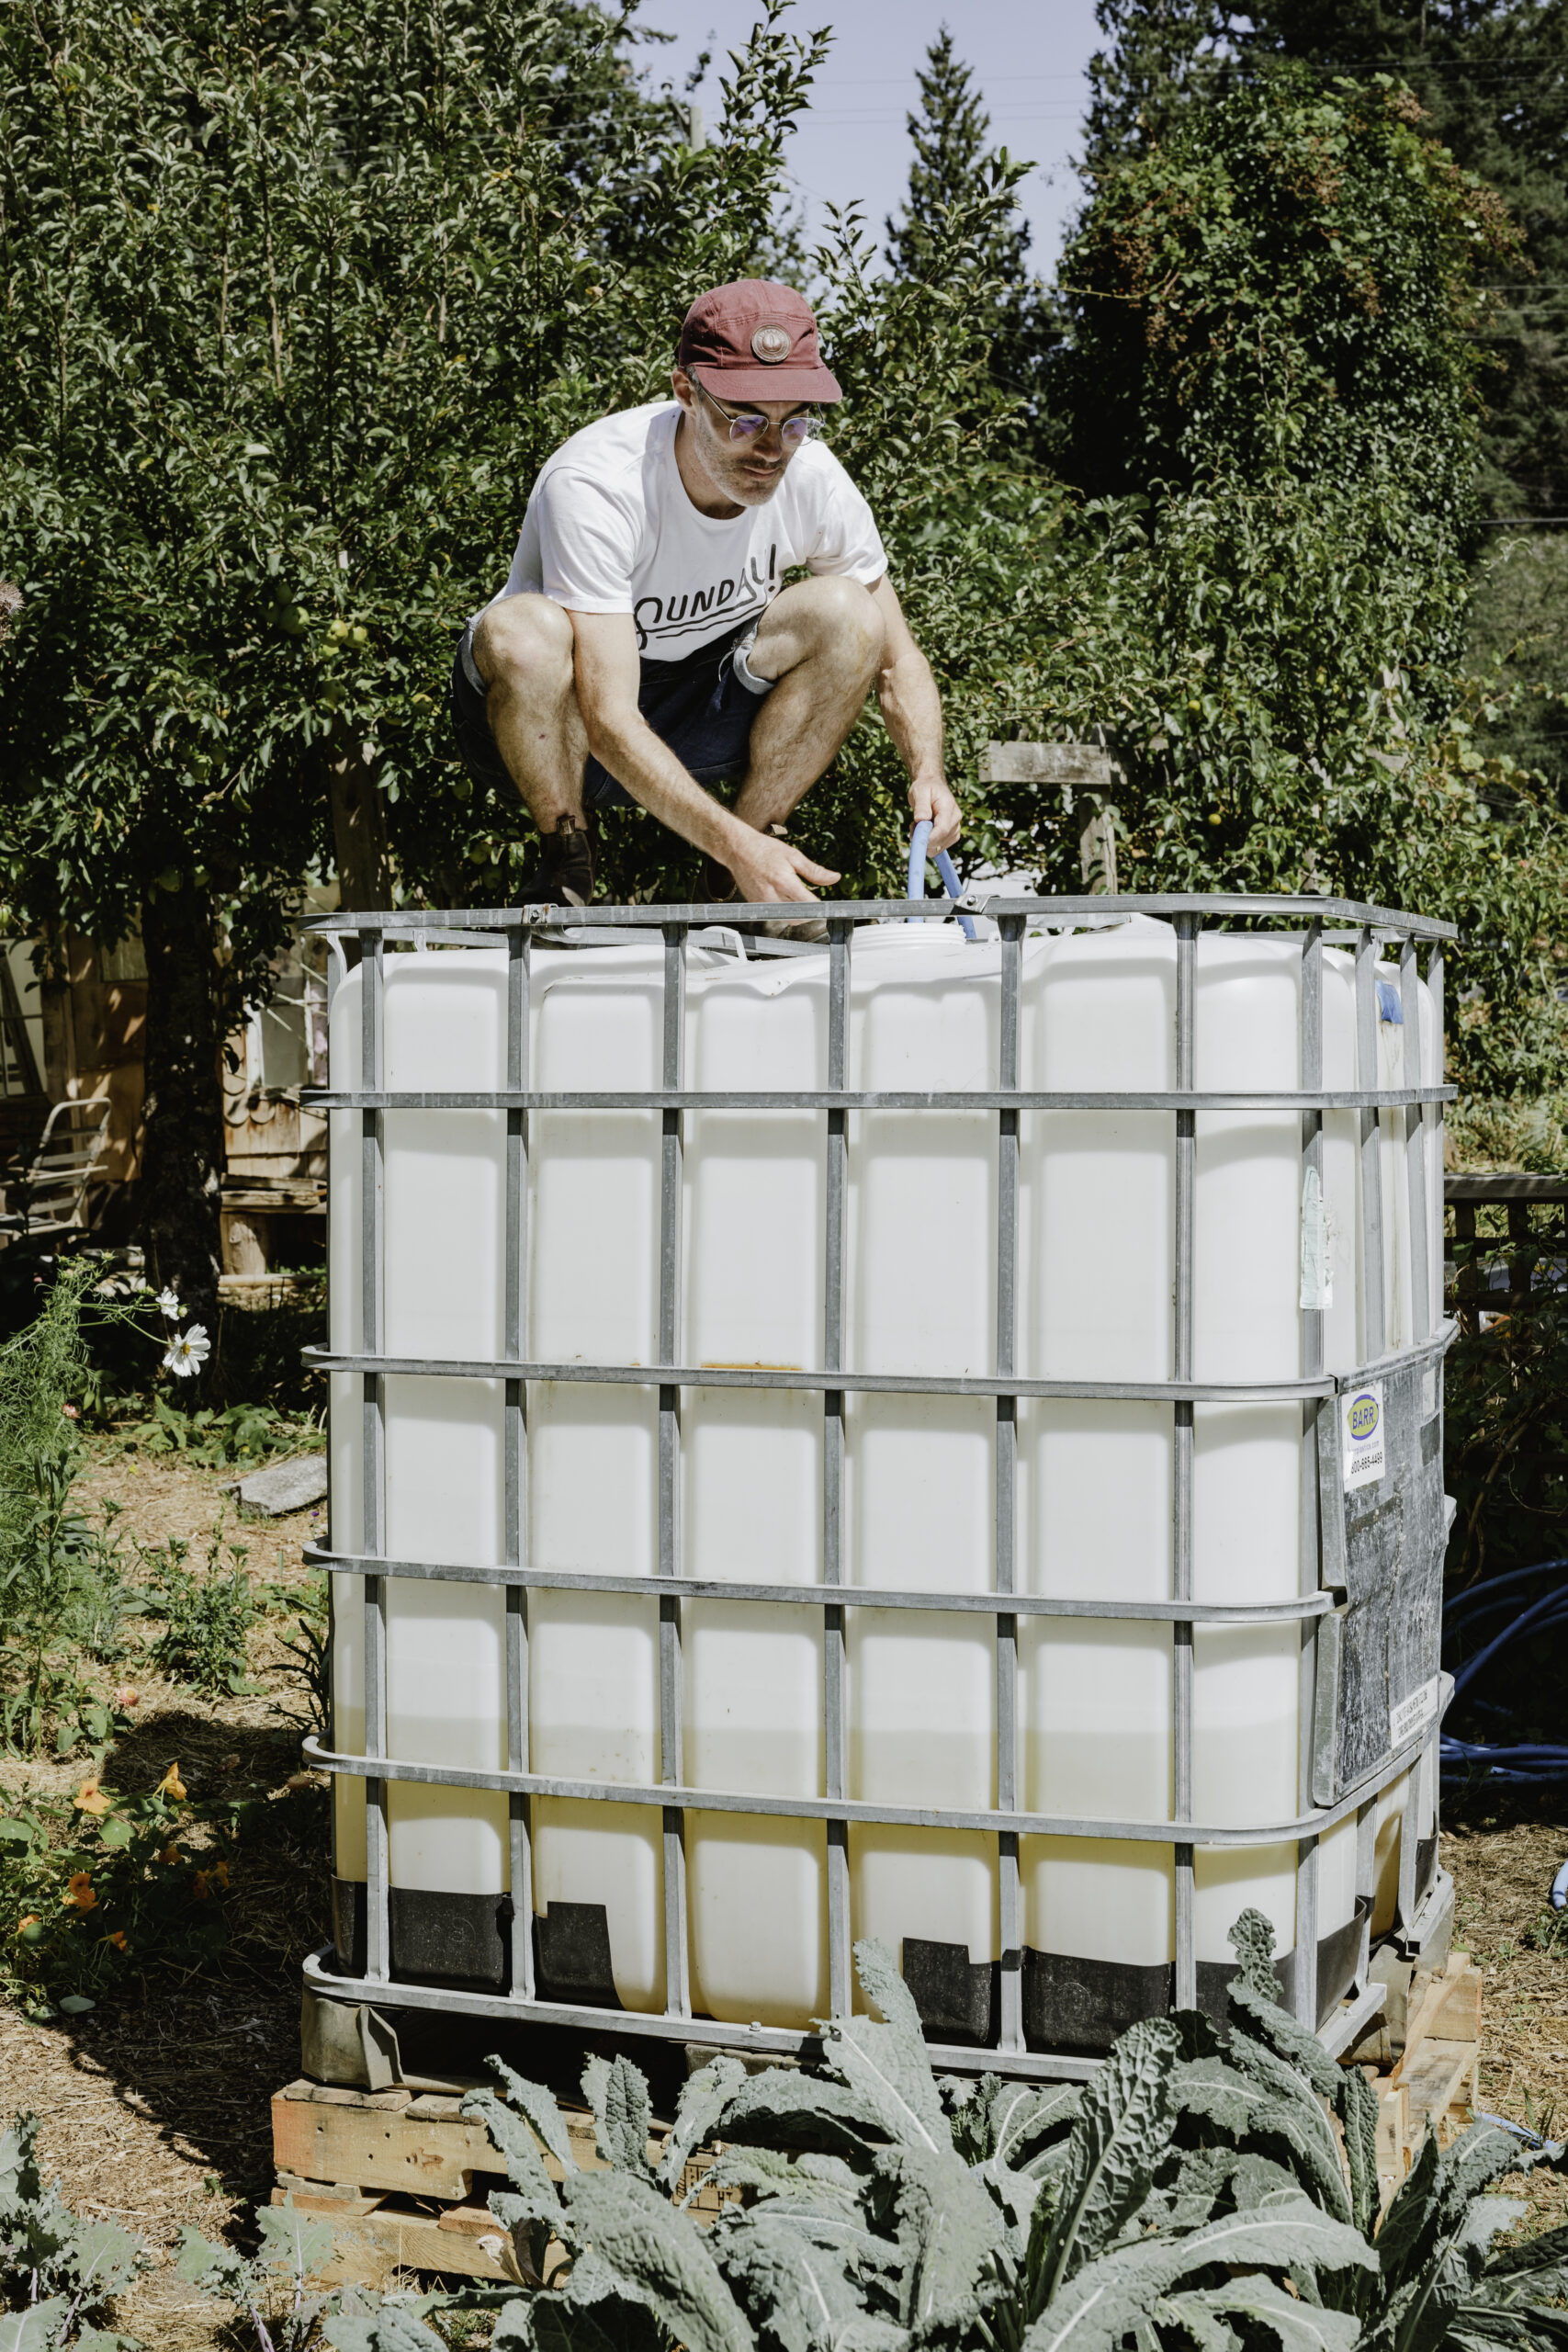 Patrick Connelly of Sunday Cider on the Sunshine Coast is seen standing on a water tank.